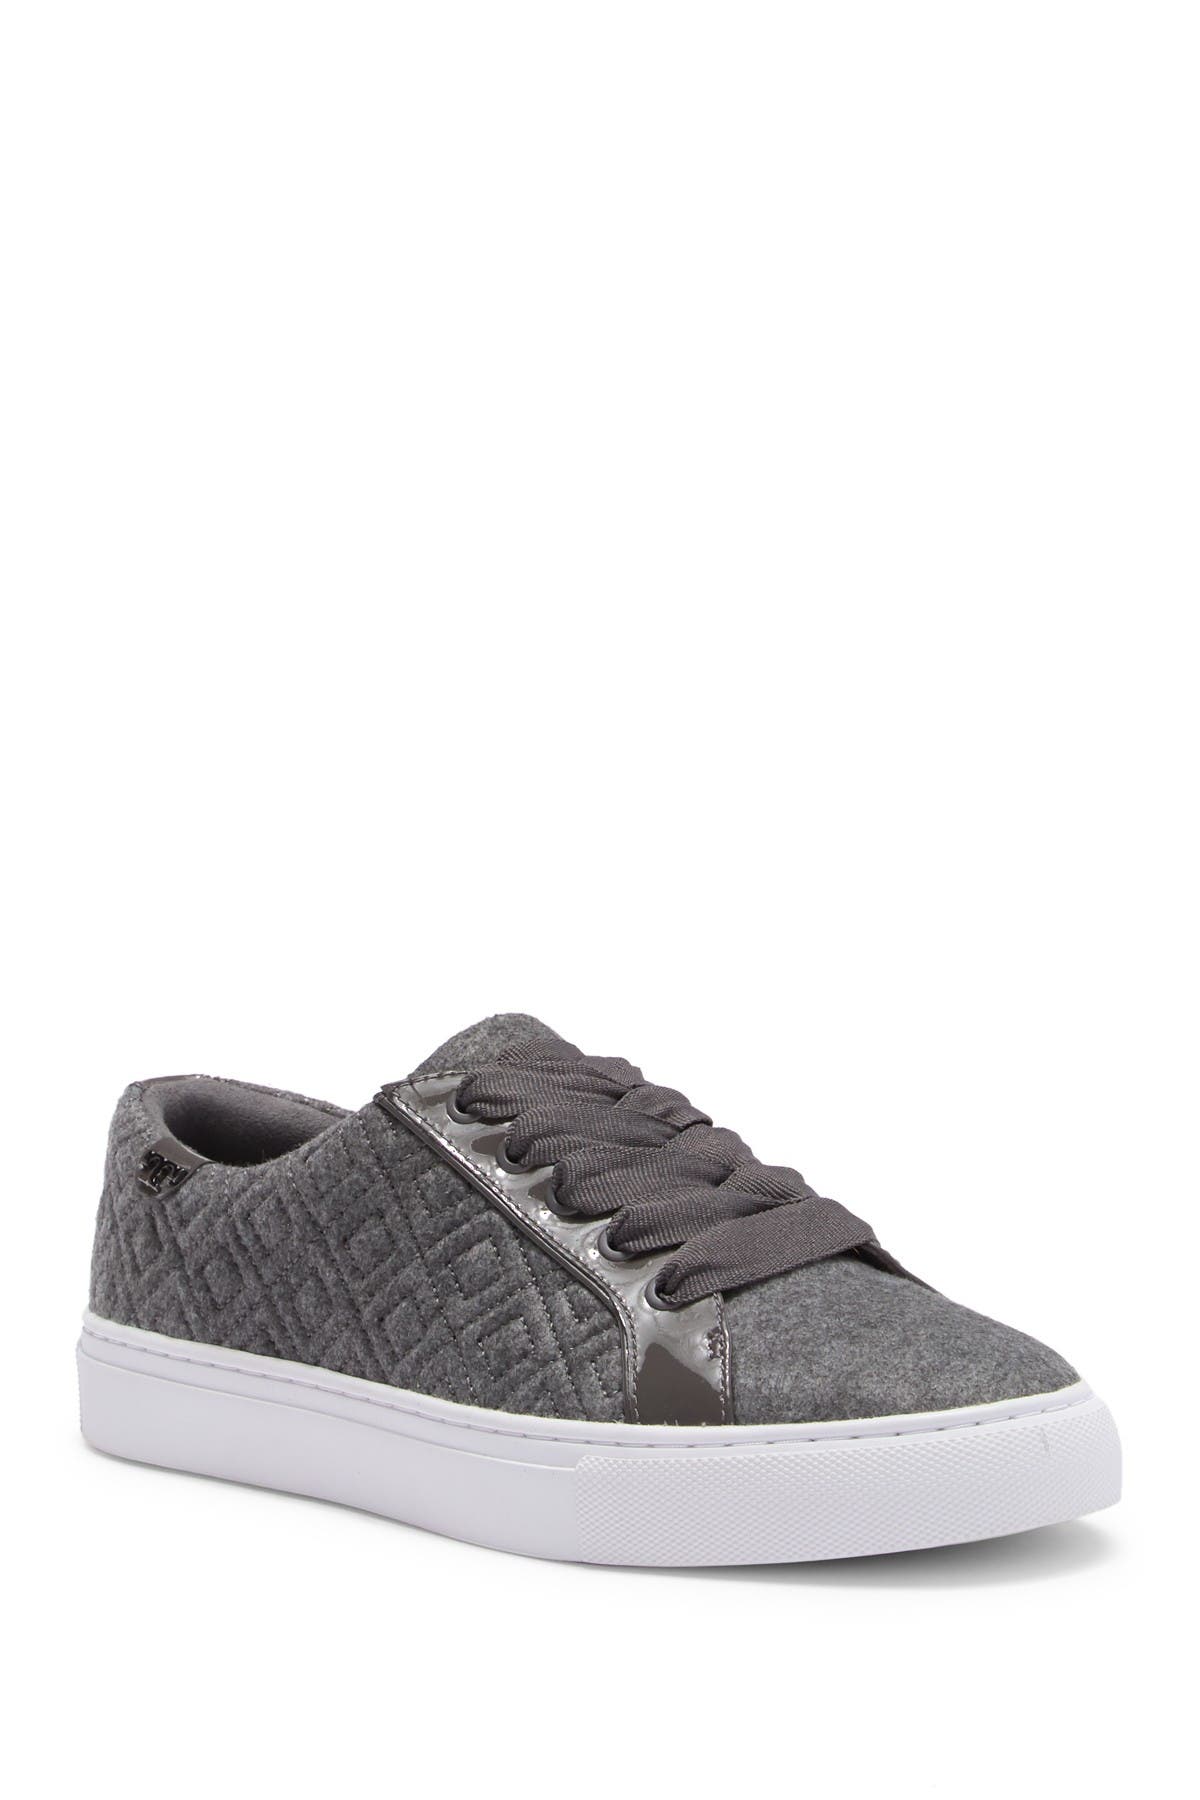 tory burch marion quilted lace up sneakers